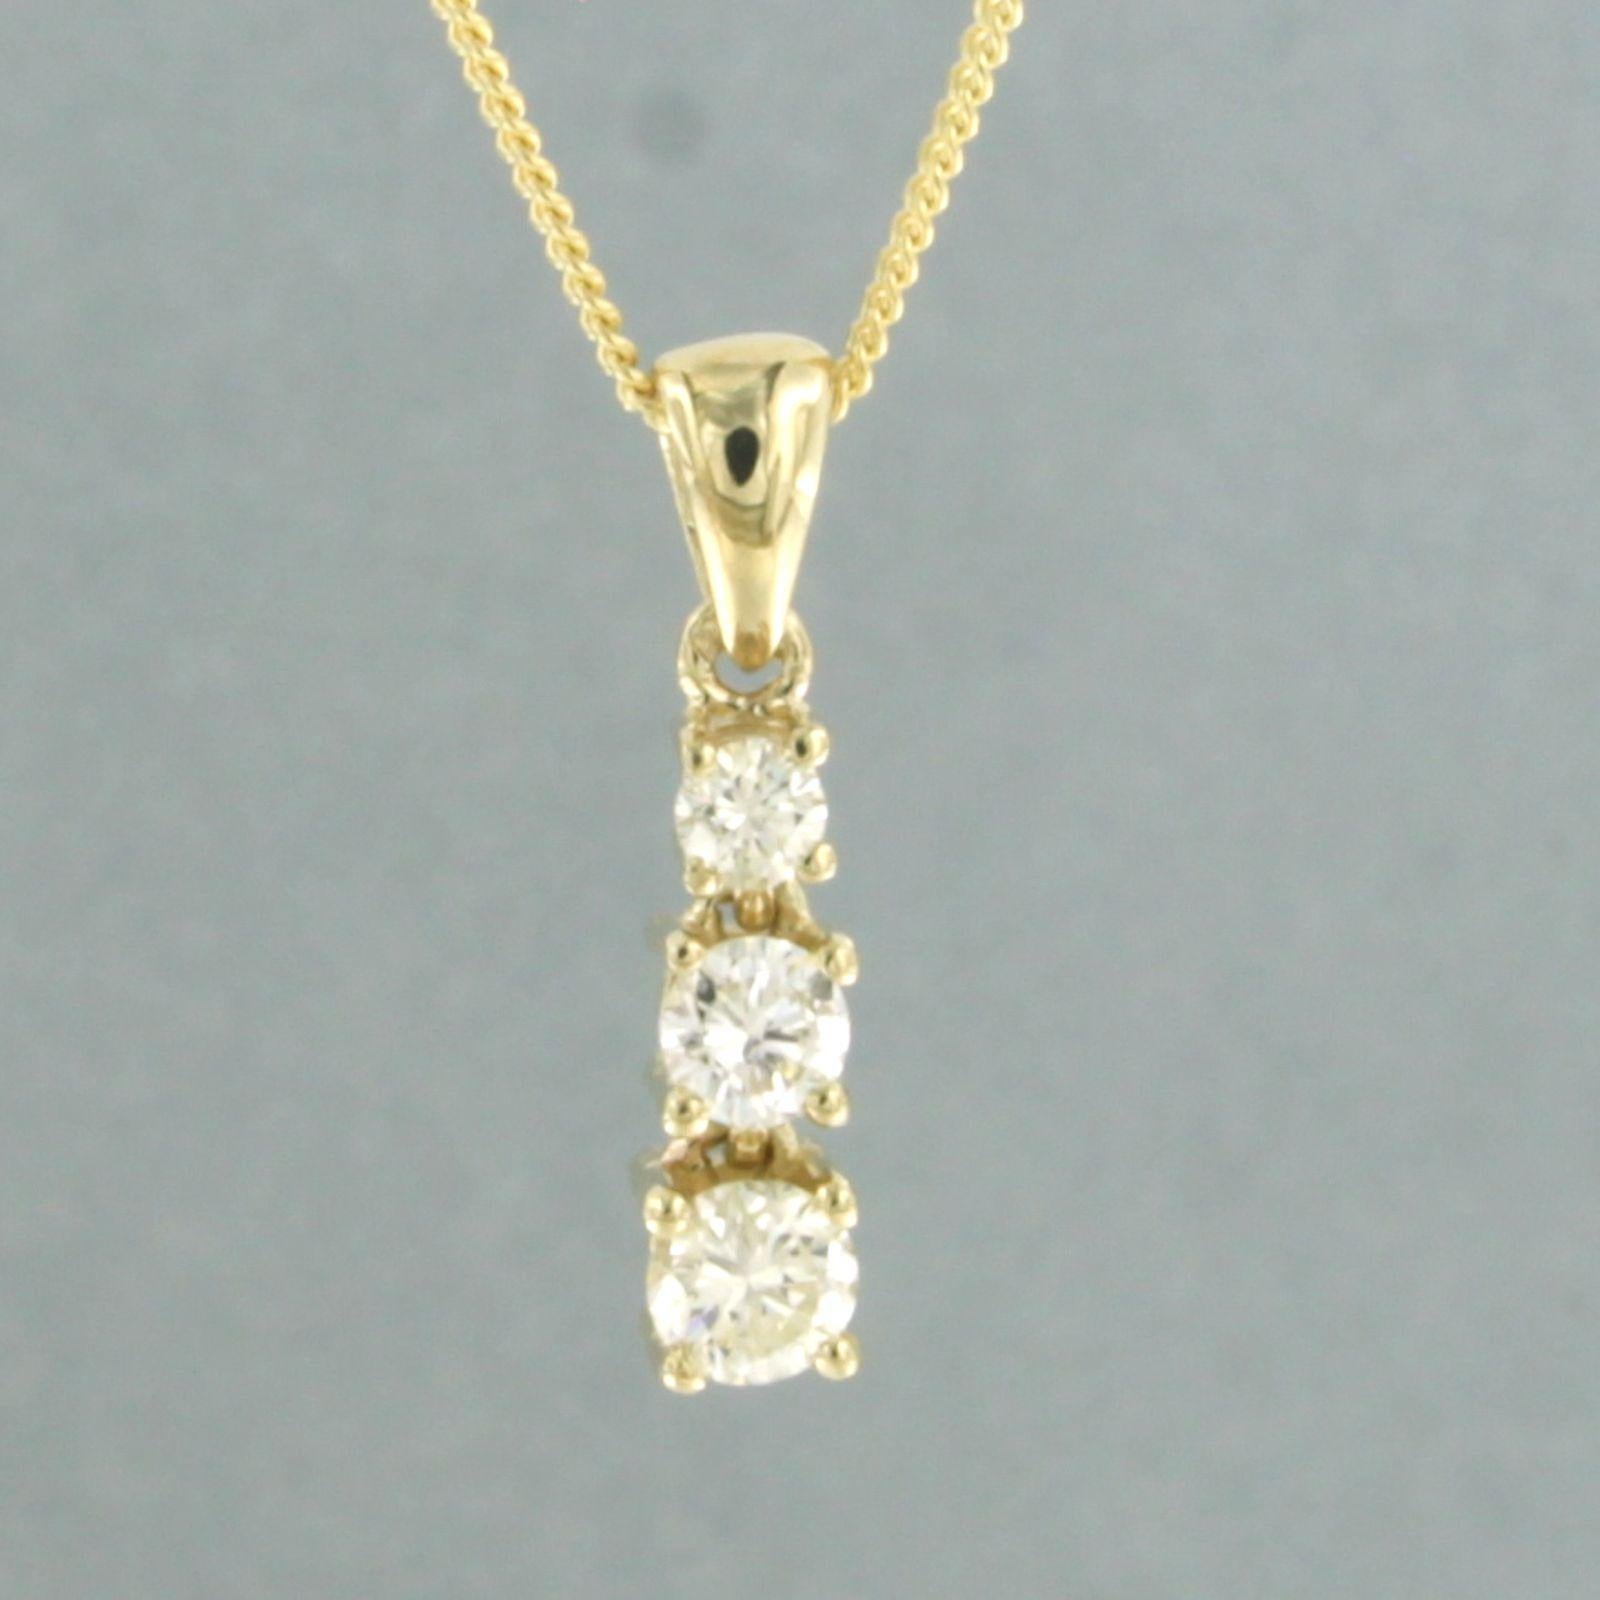 Necklace with pendant set with diamonds 14k yellow gold For Sale 1